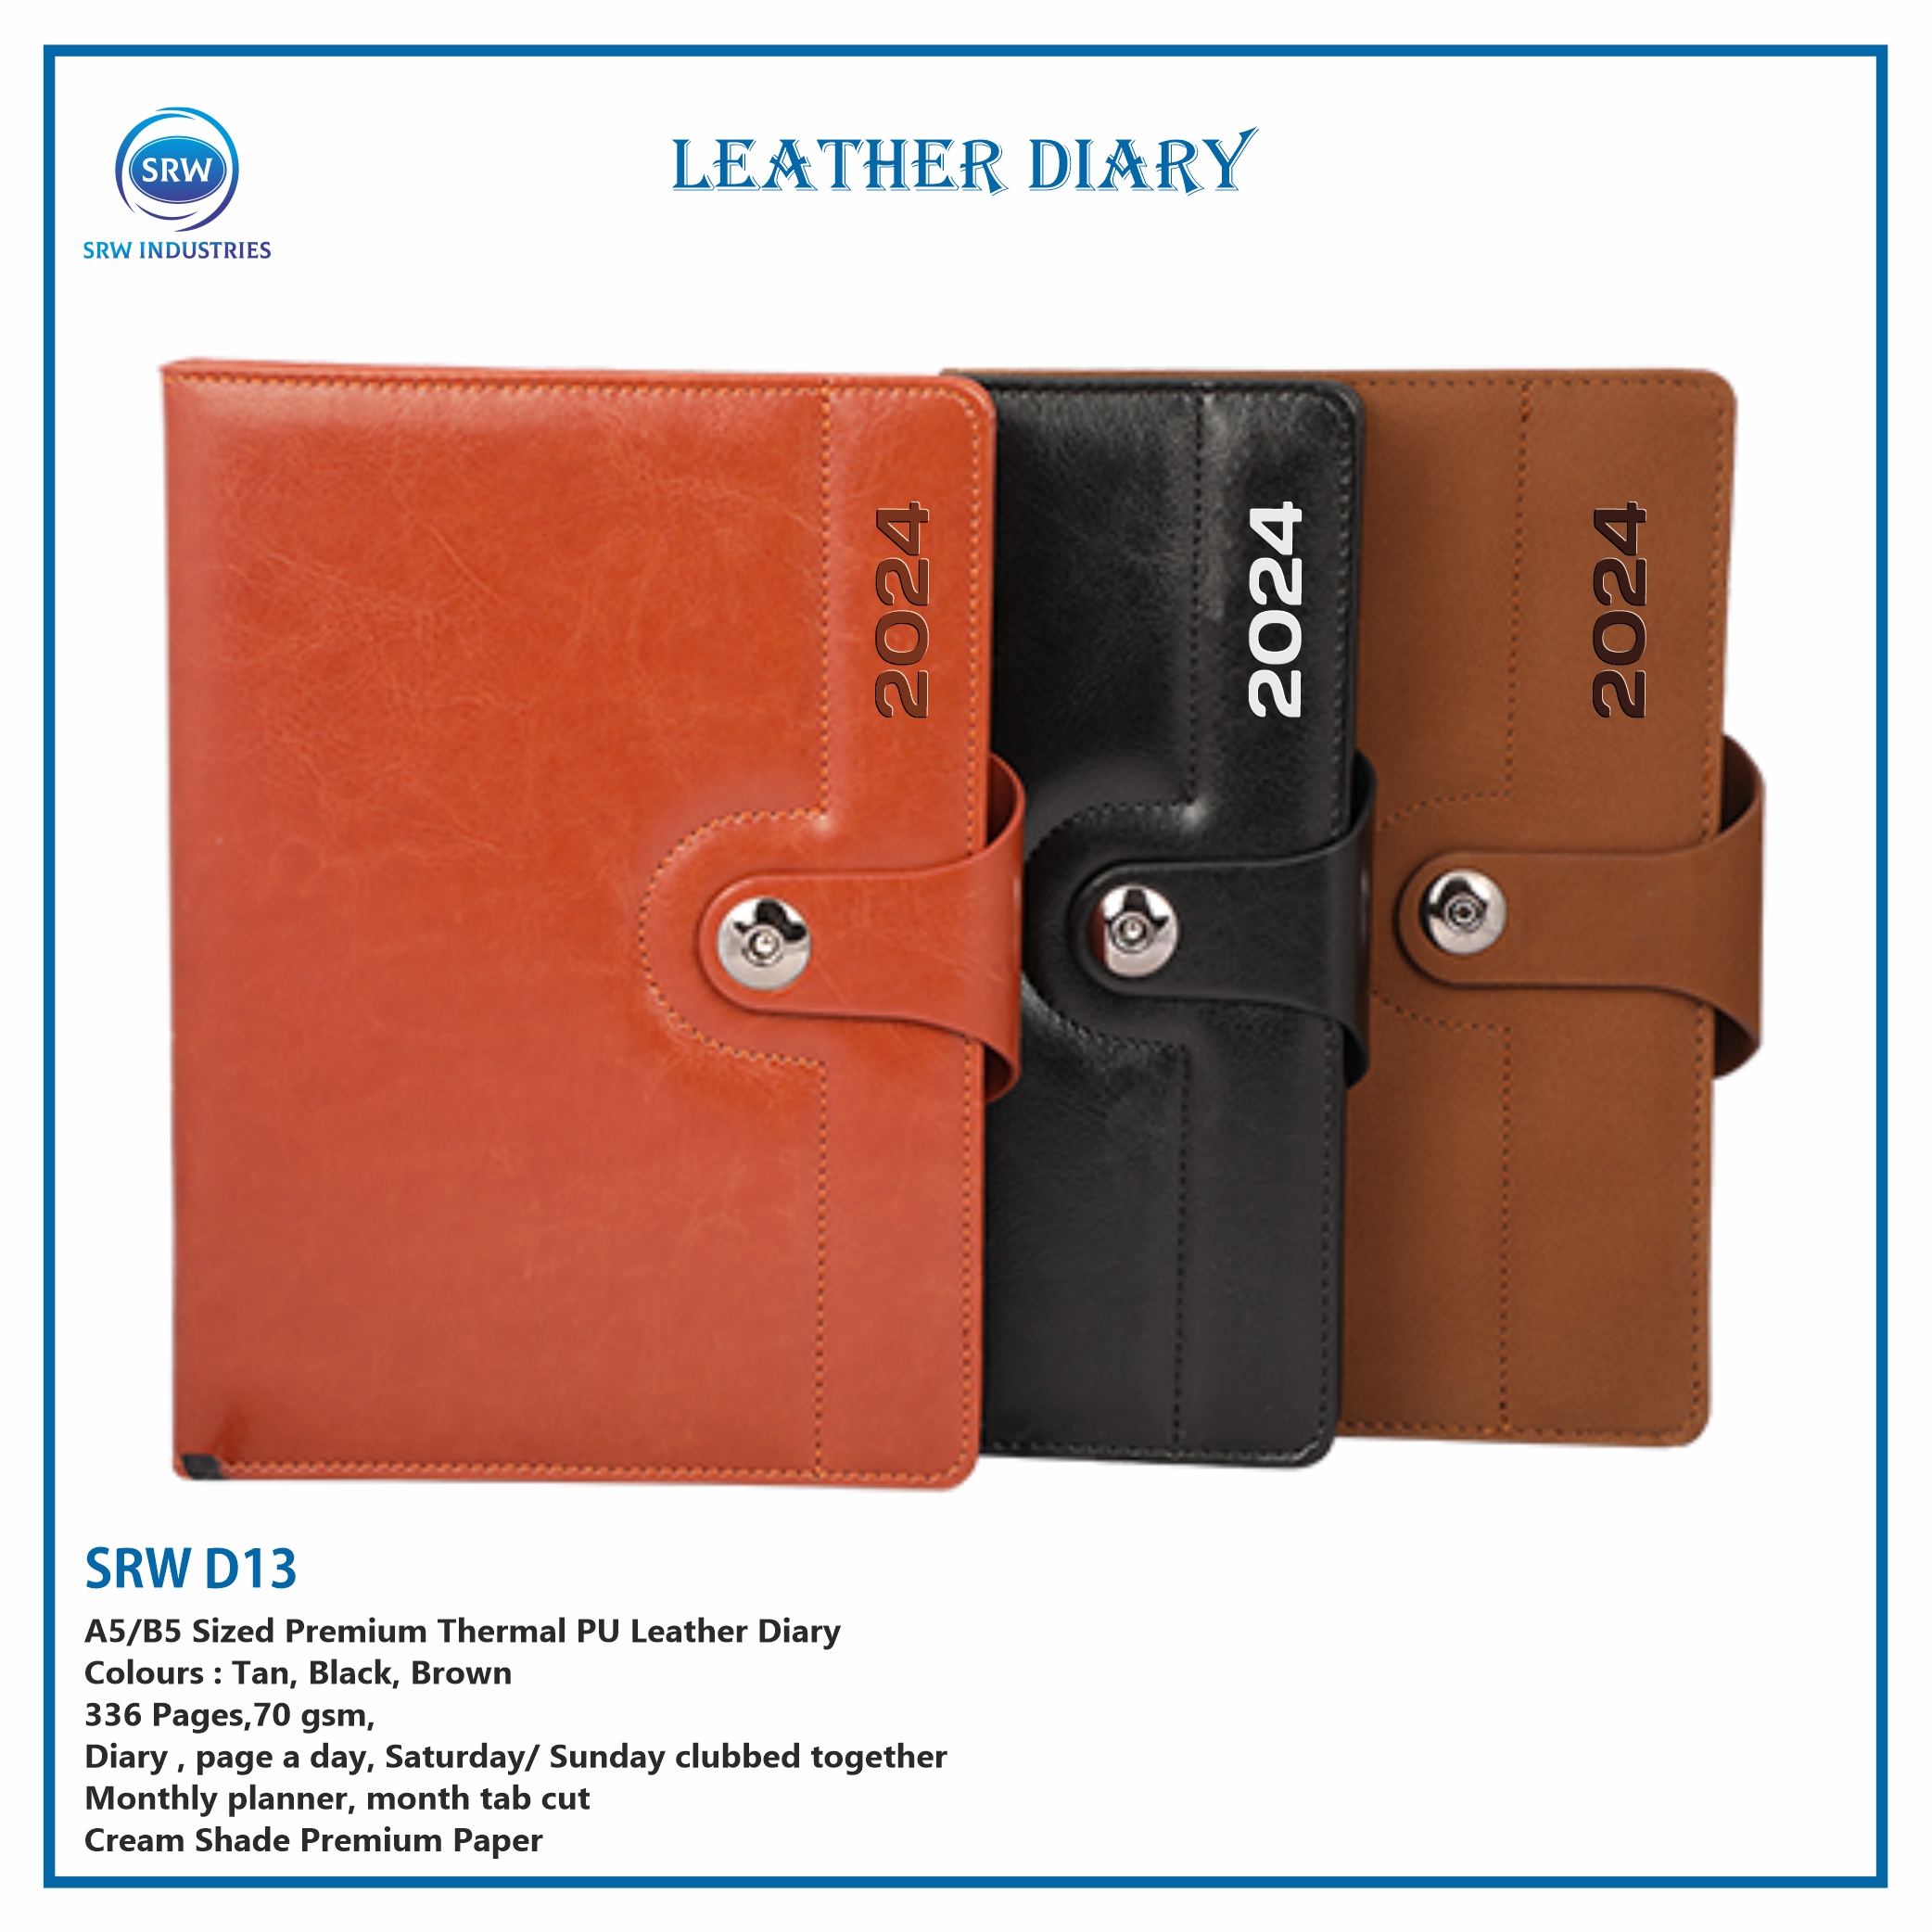 Leather Diary Manufacturers in Pune